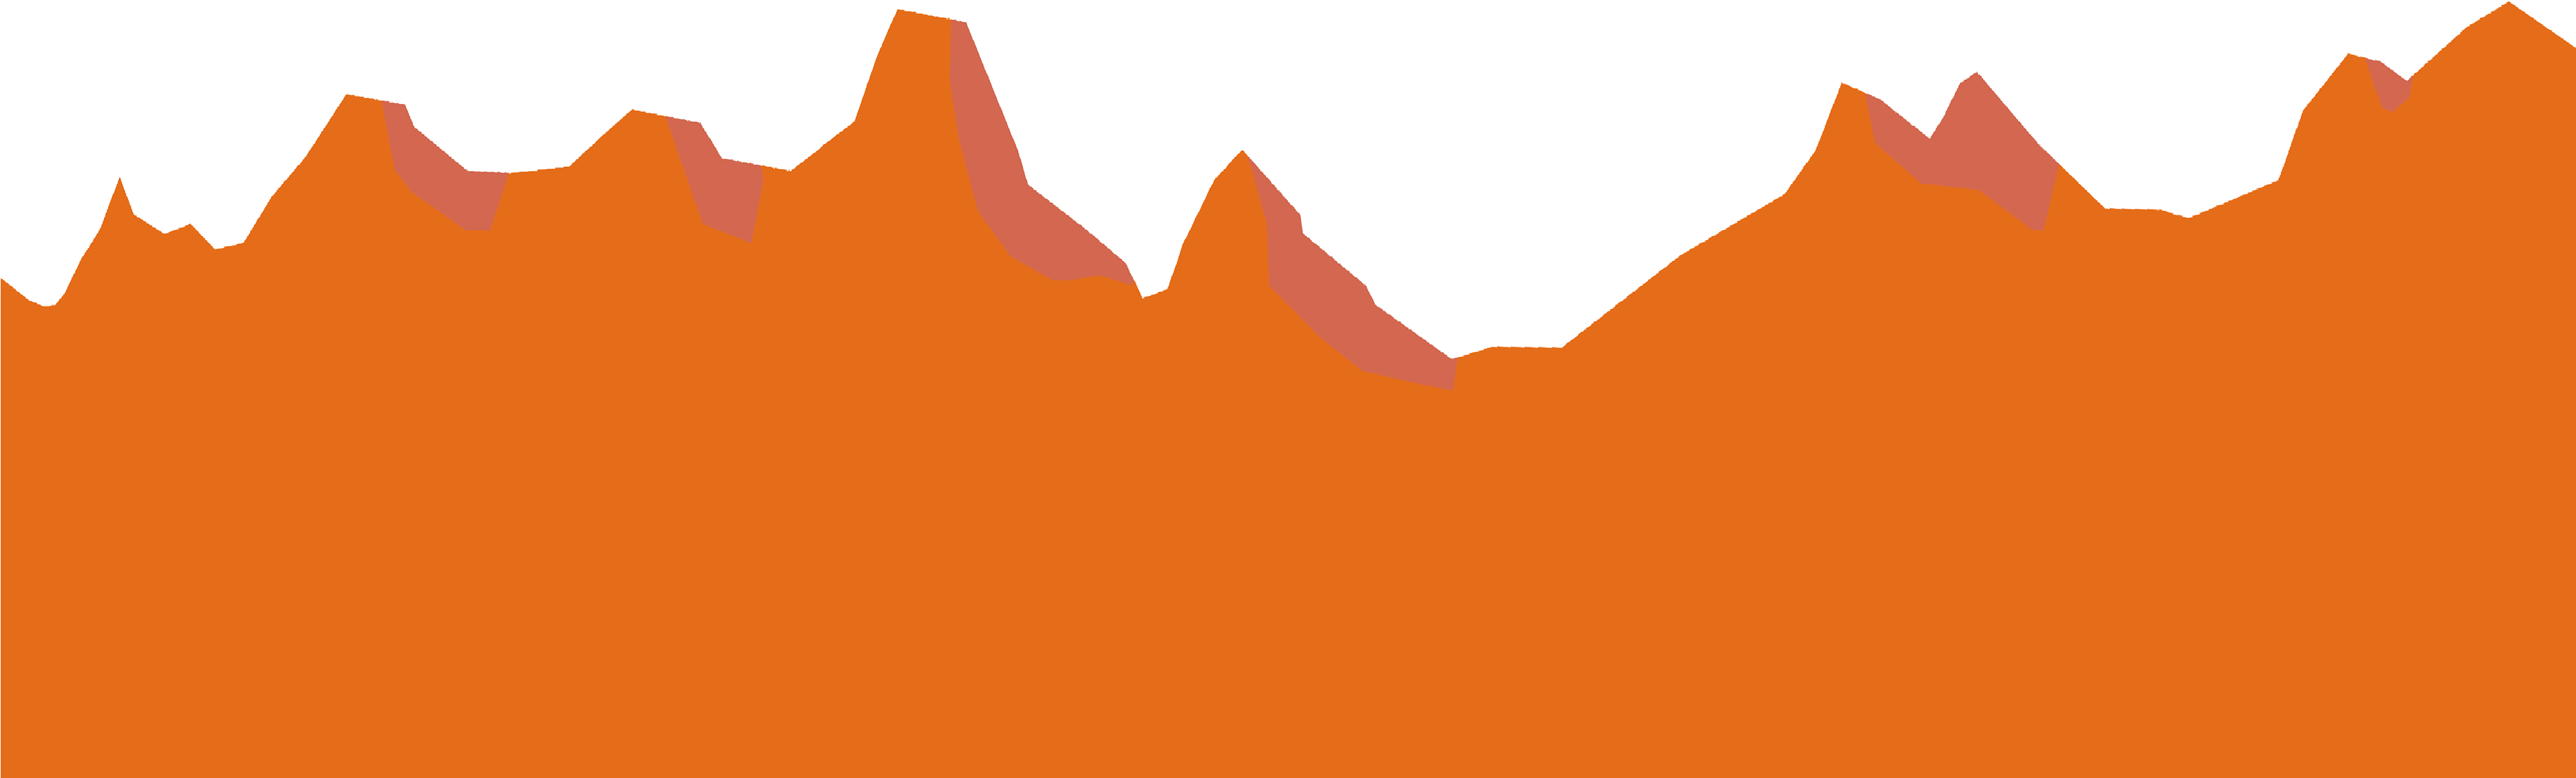 Abstract Mountain Summit Graphic PNG